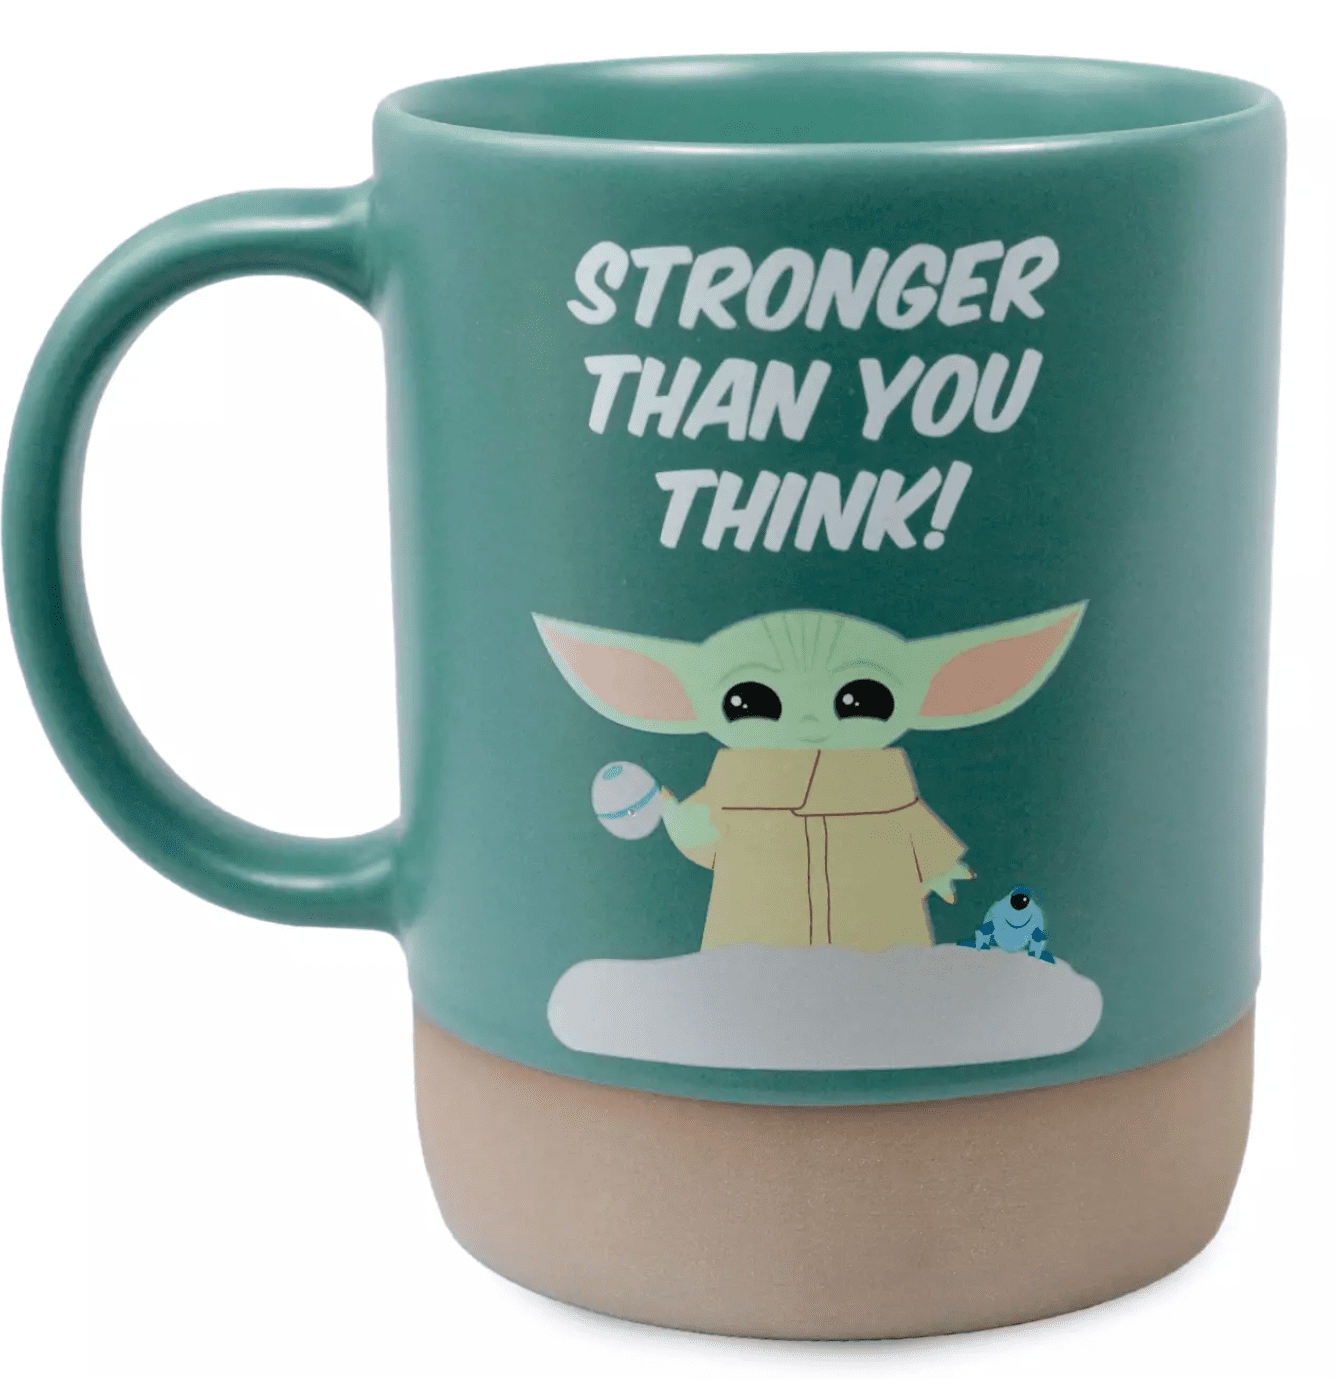 May Your Coffee Be Stronger Than Your Toddler Mug by Digibuddha